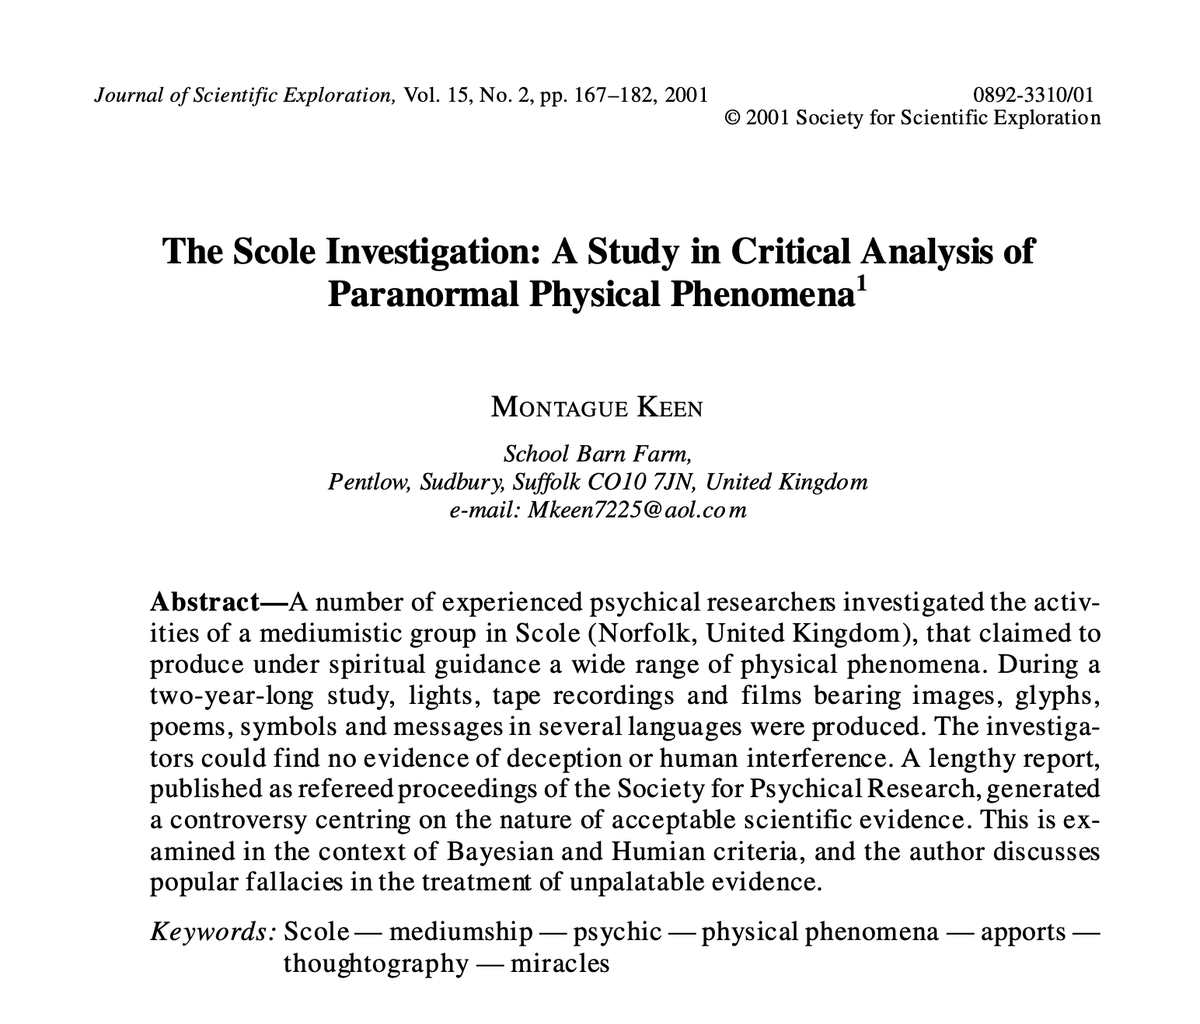 Scole Files...

'The Scole Investigation: A Study in Critical Analysis of Paranormal Physical Phenomena' in Journal of Scientific Exploration (2001).

rb.gy/kisk25

by Montague Keen, co-author of 'The Scole Report' published in 1999 by @SPR1882

amzn.to/47DbaRu